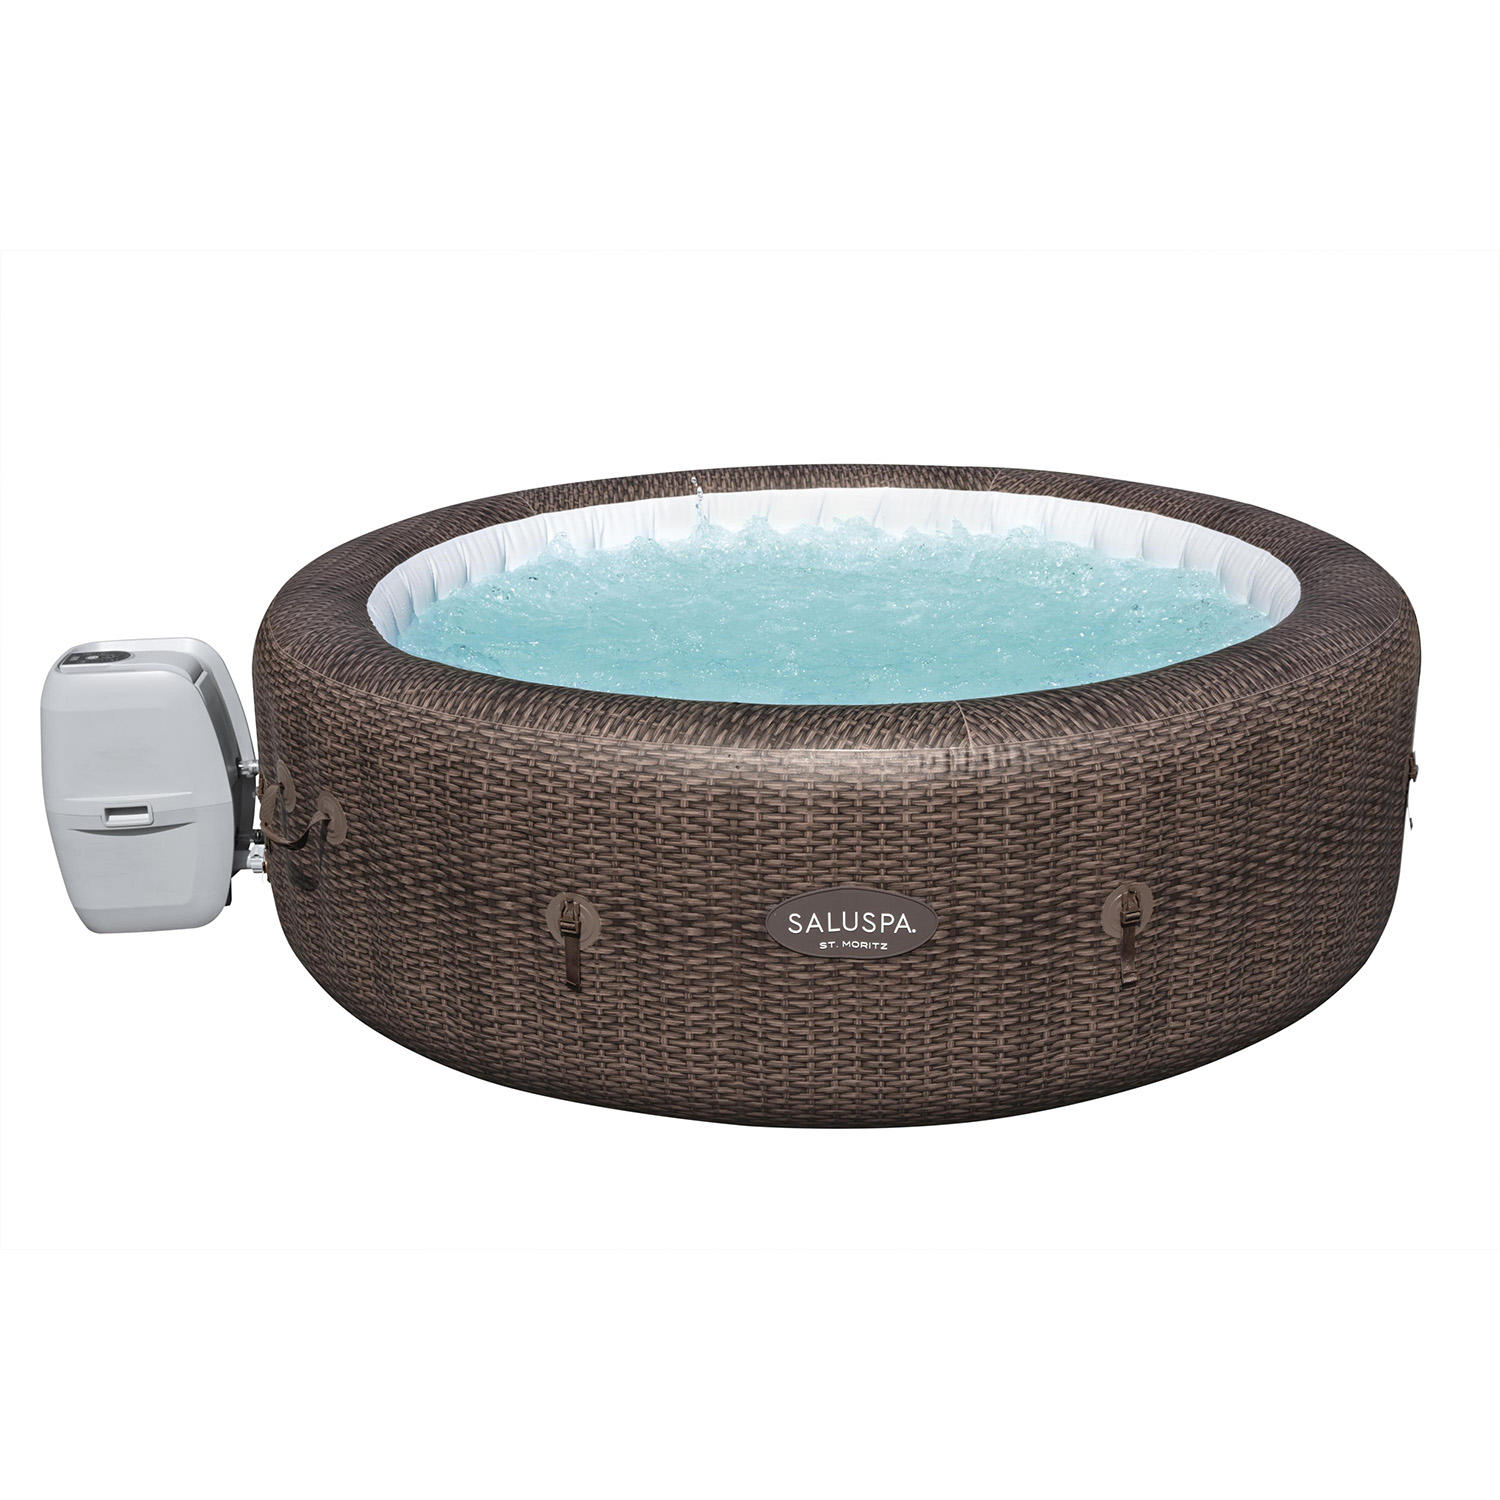 SaluSpa St. Moritz AirJet 5-7 Person Inflatable Hot Tub with App-Control